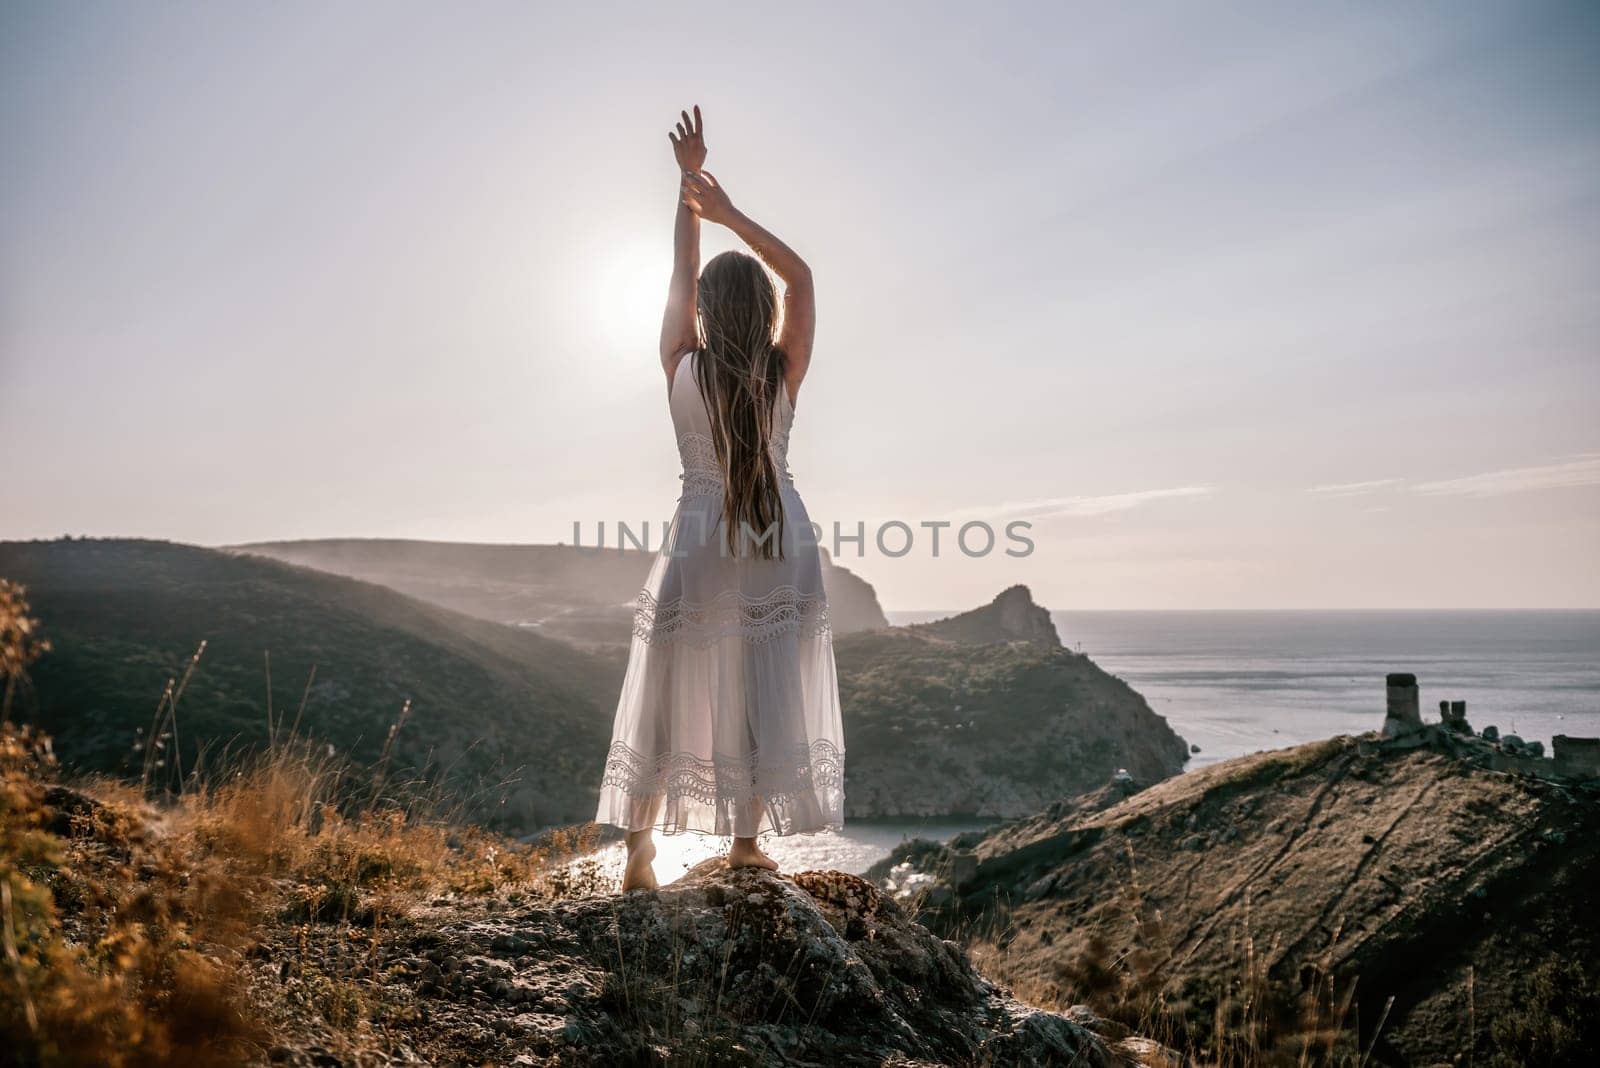 A woman stands on a hill overlooking the ocean. She is wearing a white dress and has her hands on her head. The scene is serene and peaceful, with the woman looking out over the water. by Matiunina